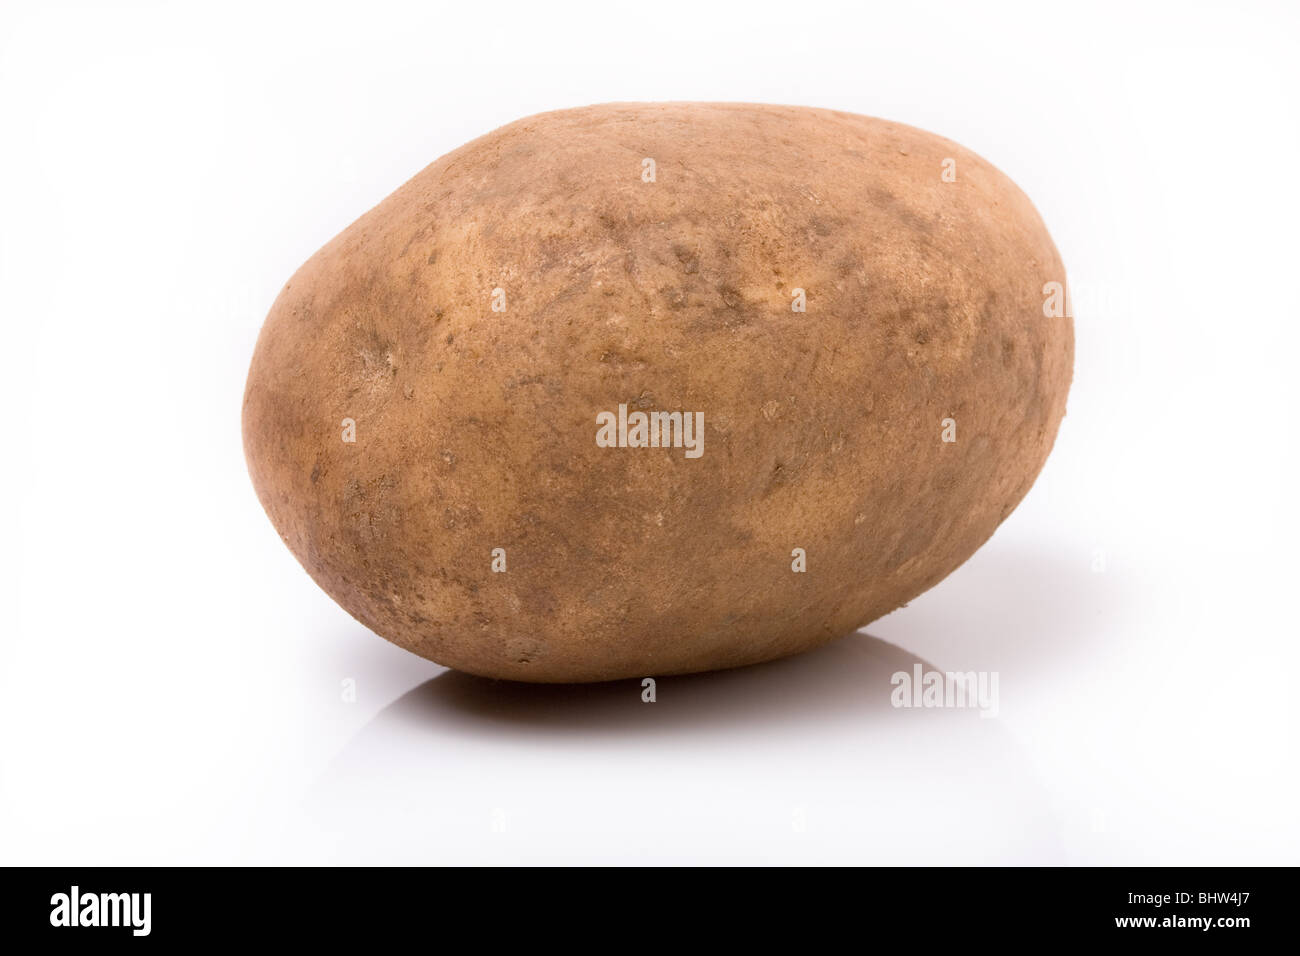 Large unwashed natural potato from low viewpoint aganst white background. Stock Photo